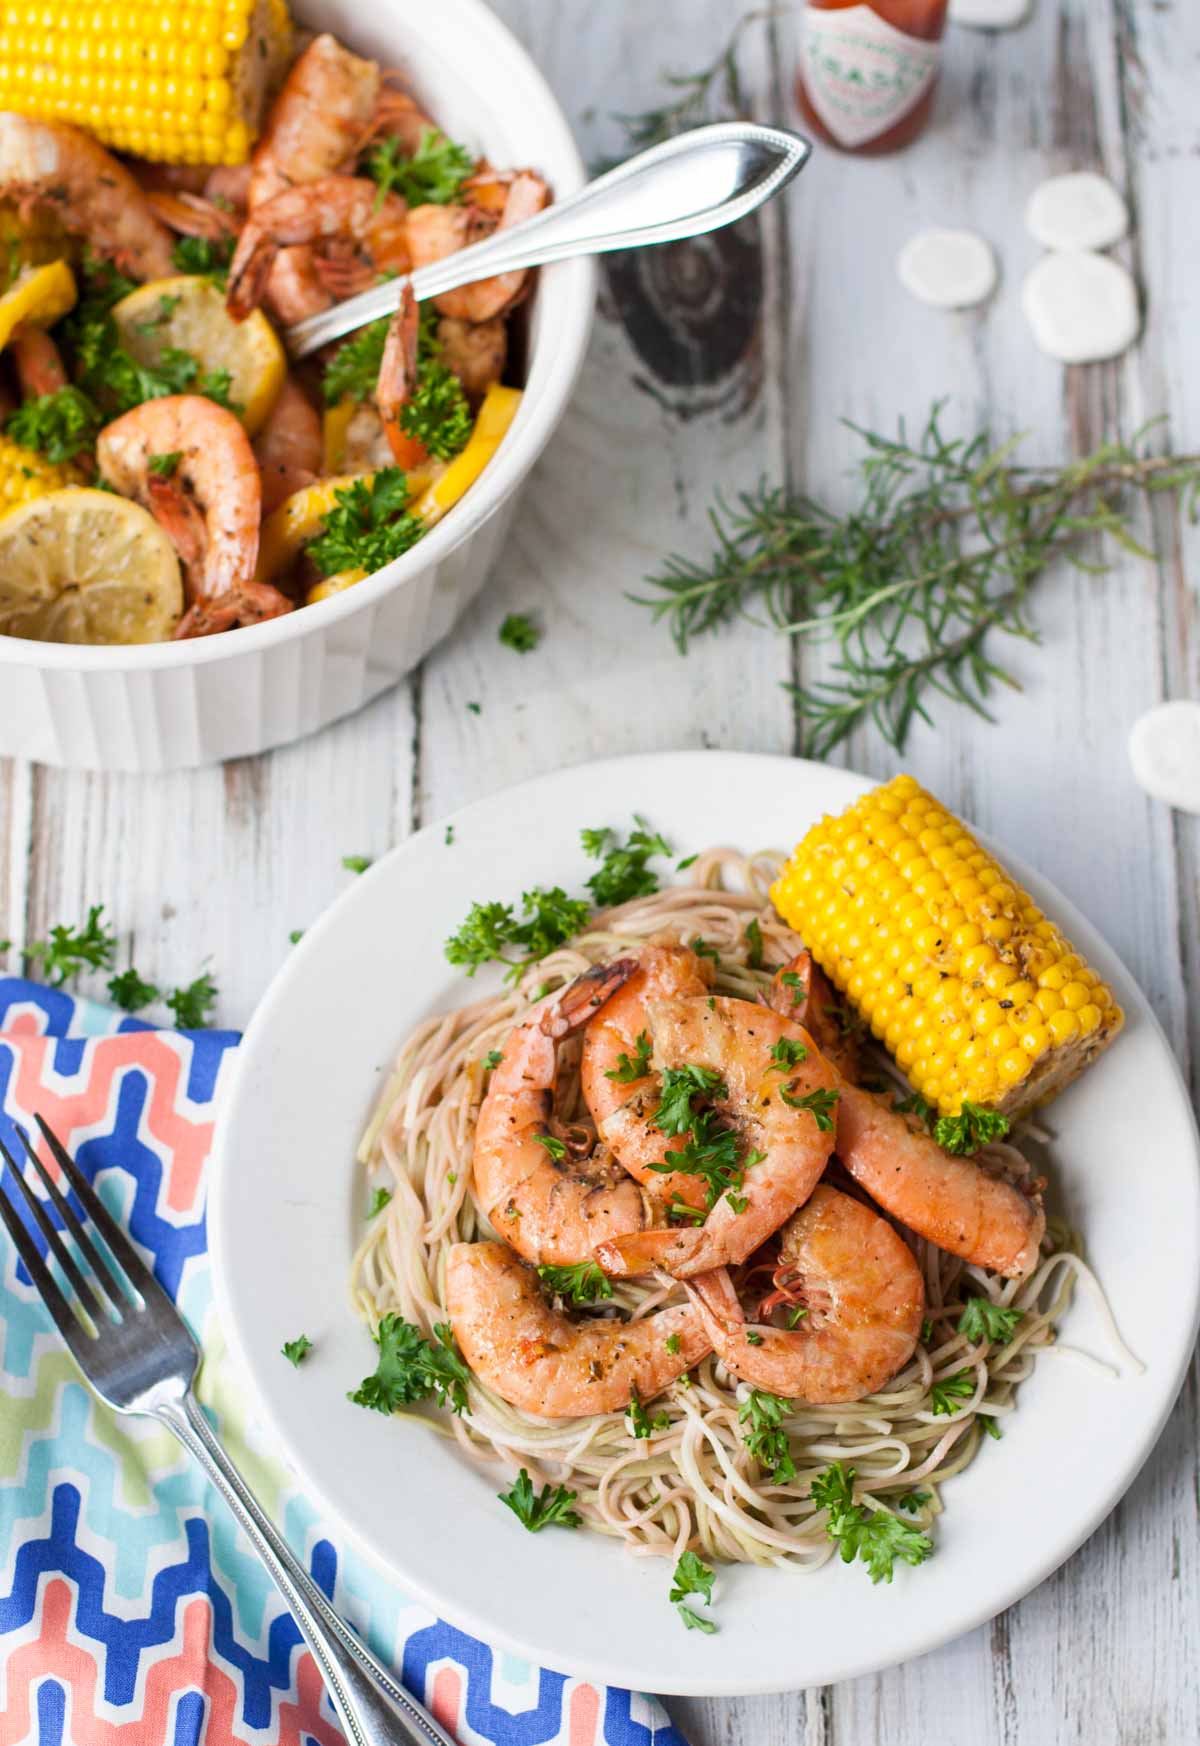 Bayou Shrimp Pasta | WorldofPastabilities.com | Zesty Cajun Bayou Shrimp Pasta is the must do beach recipe! Simple to make it delivers a ton of flavor. Get messy and have fun with the entire family!